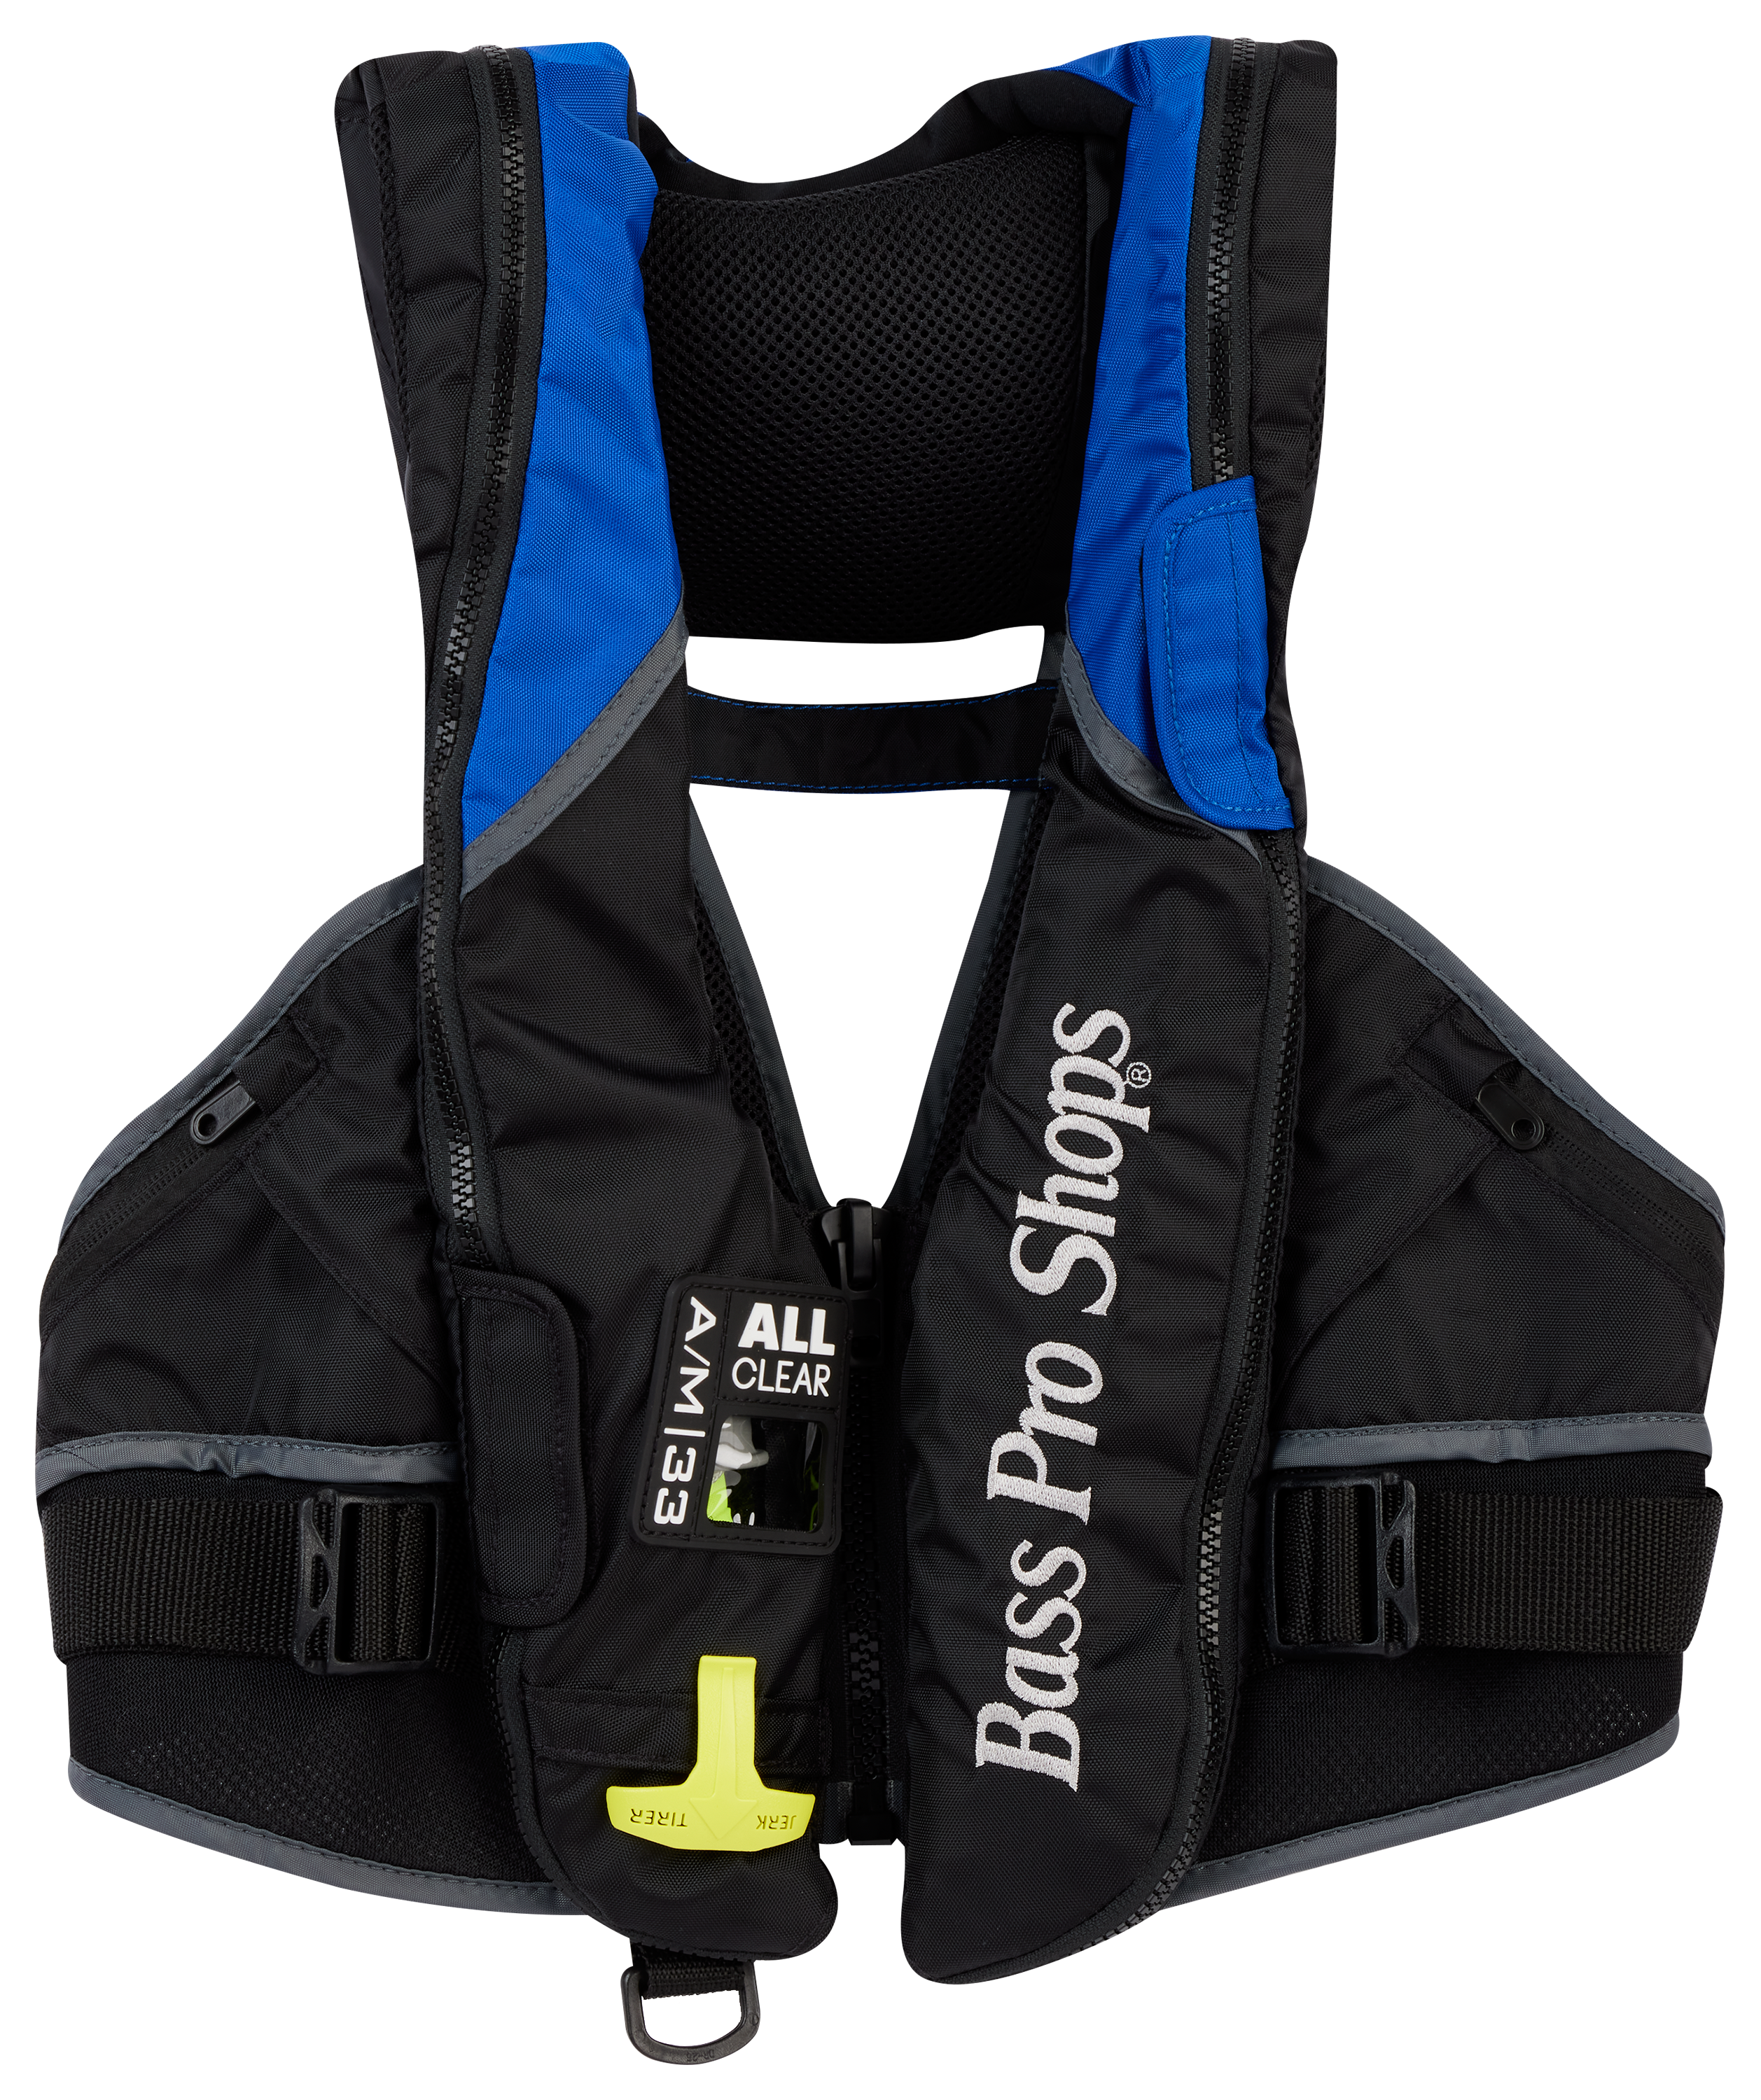 Bass Pro Shops AM33 Deluxe All-Clear Auto-Inflatable Life Jacket